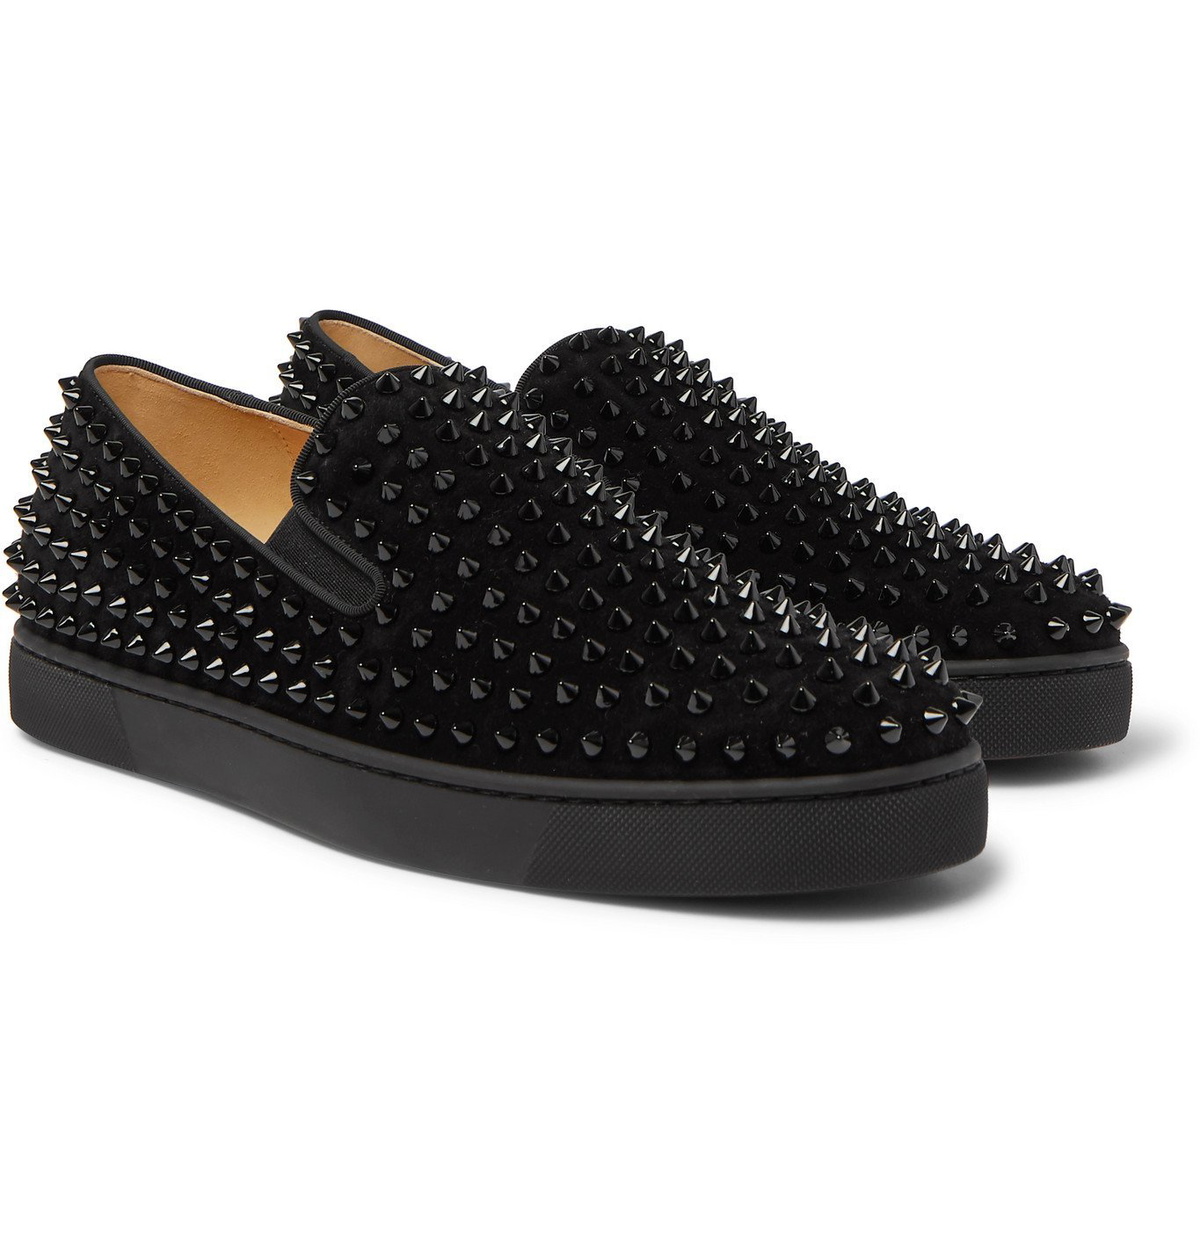 Louboutin Roller-Boat Spiked Suede Slip-On